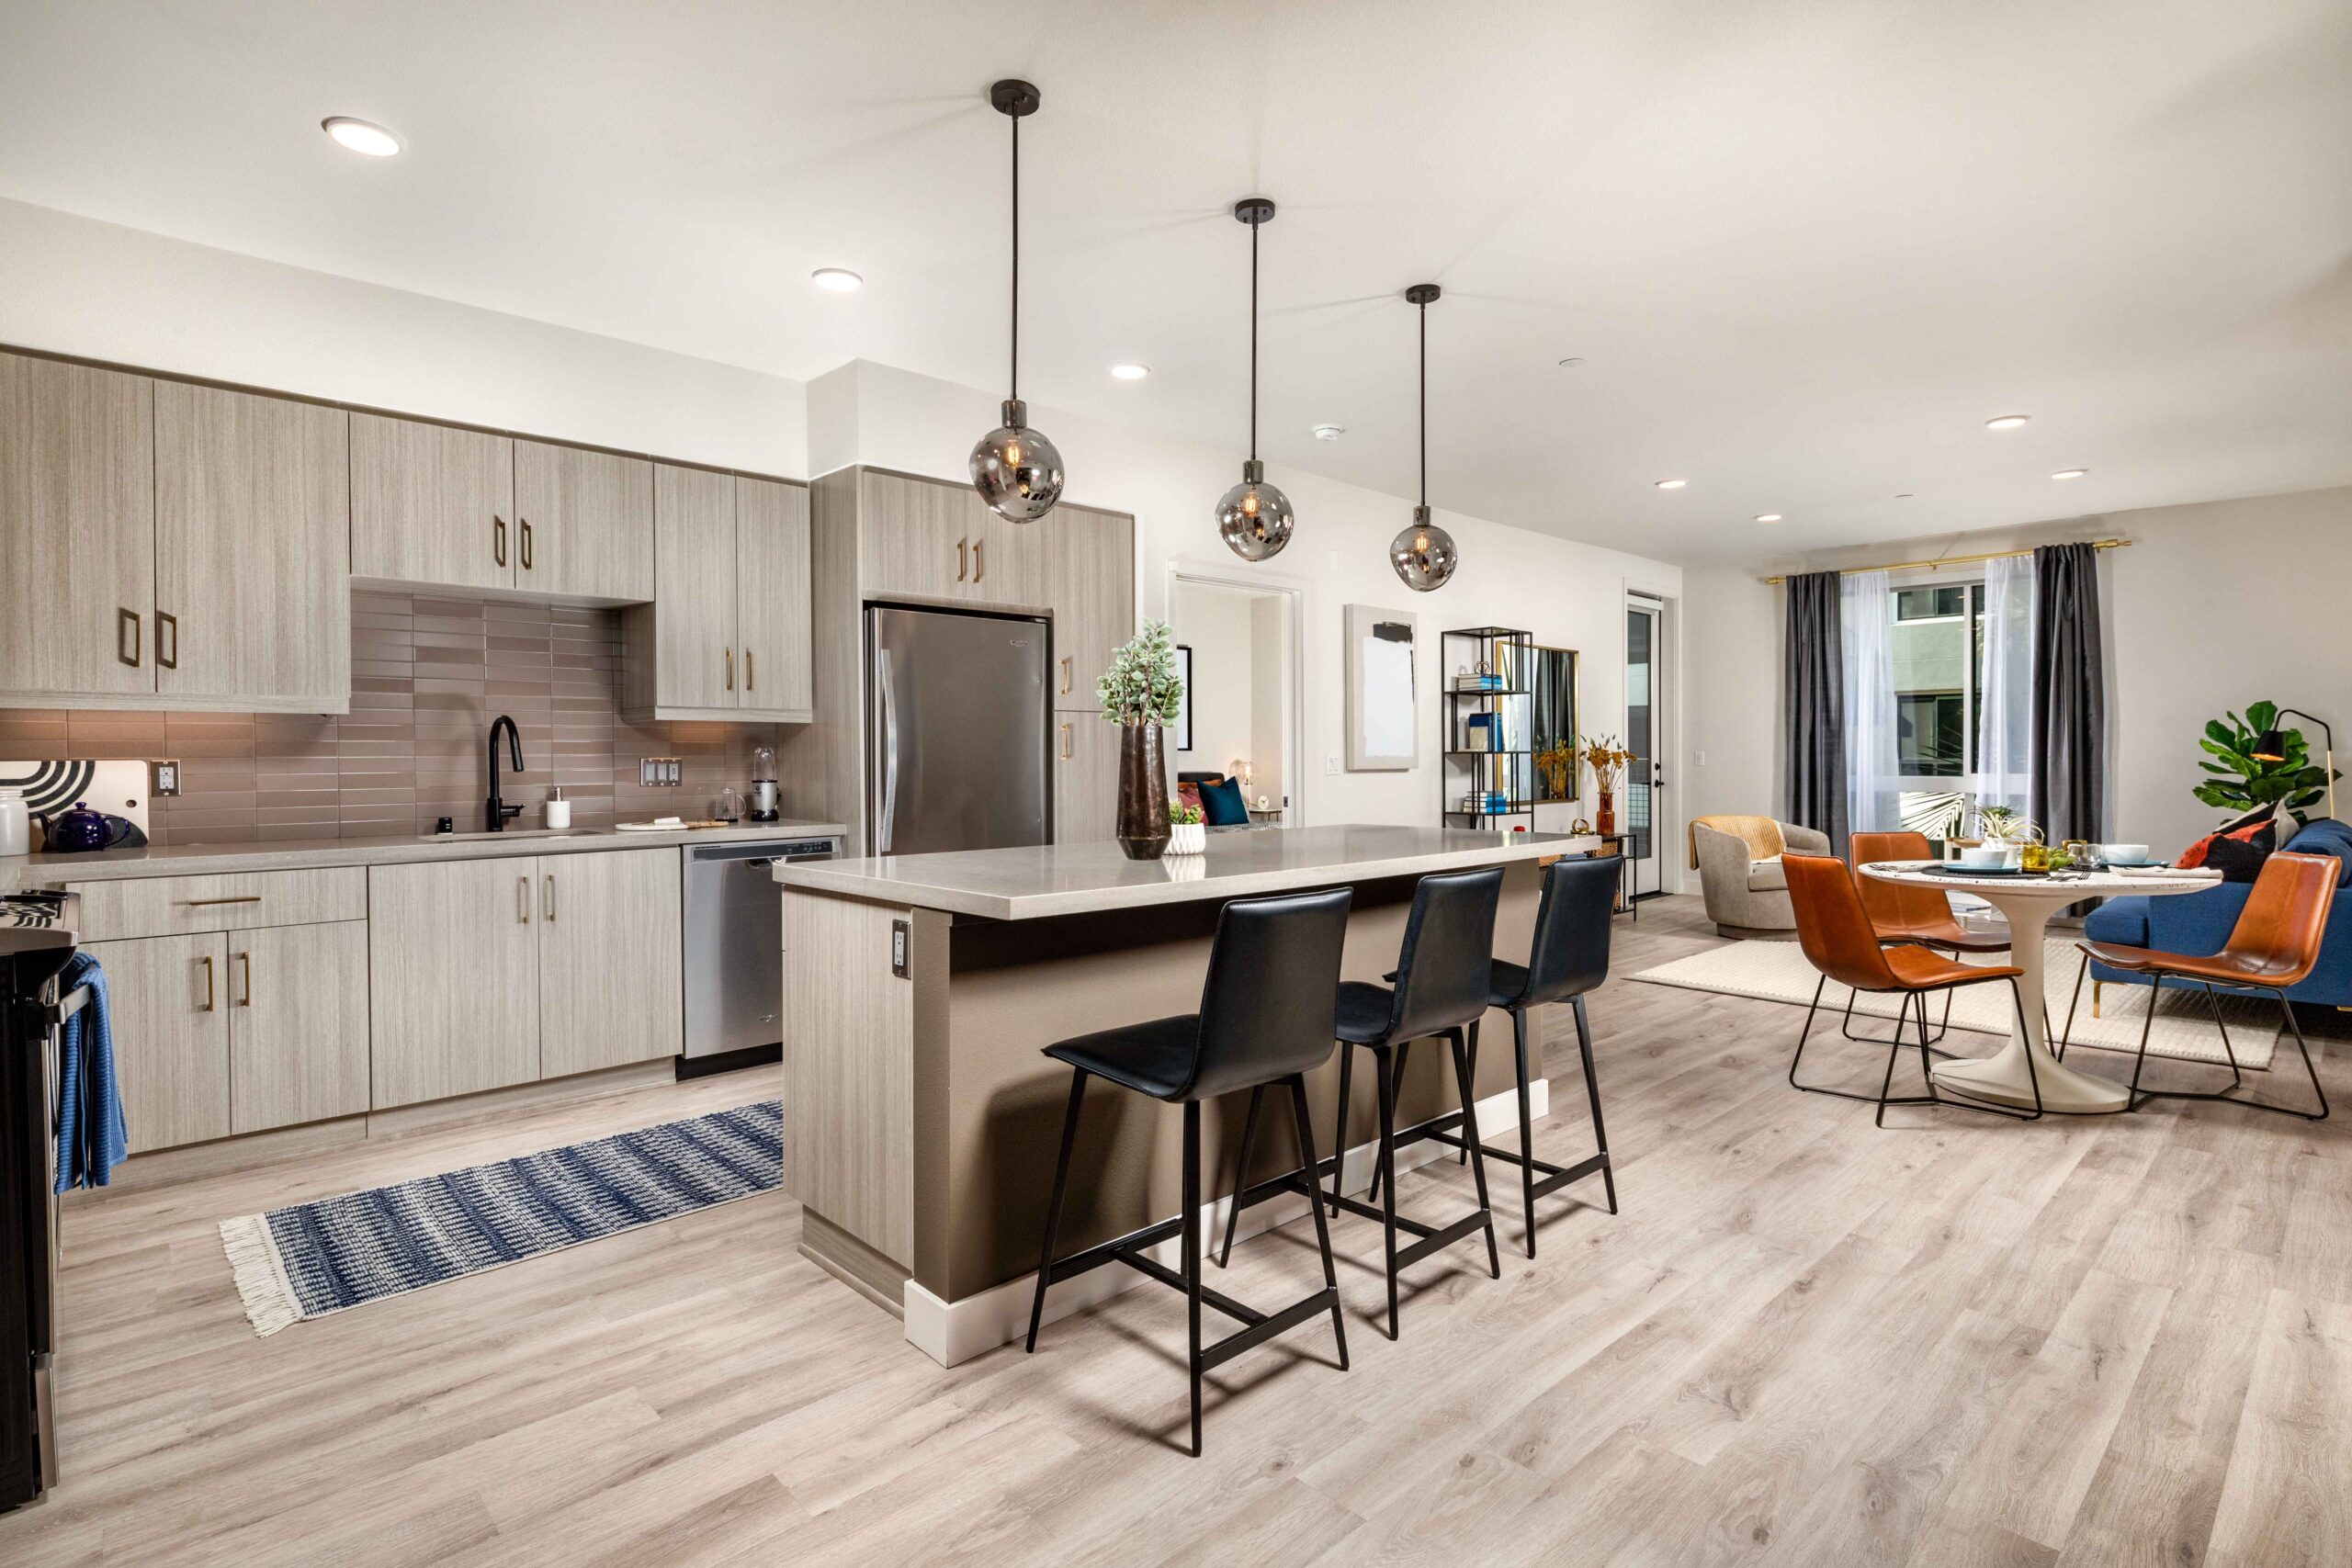 Modern kitchen with island seating and dining and living areas in background at Cameo